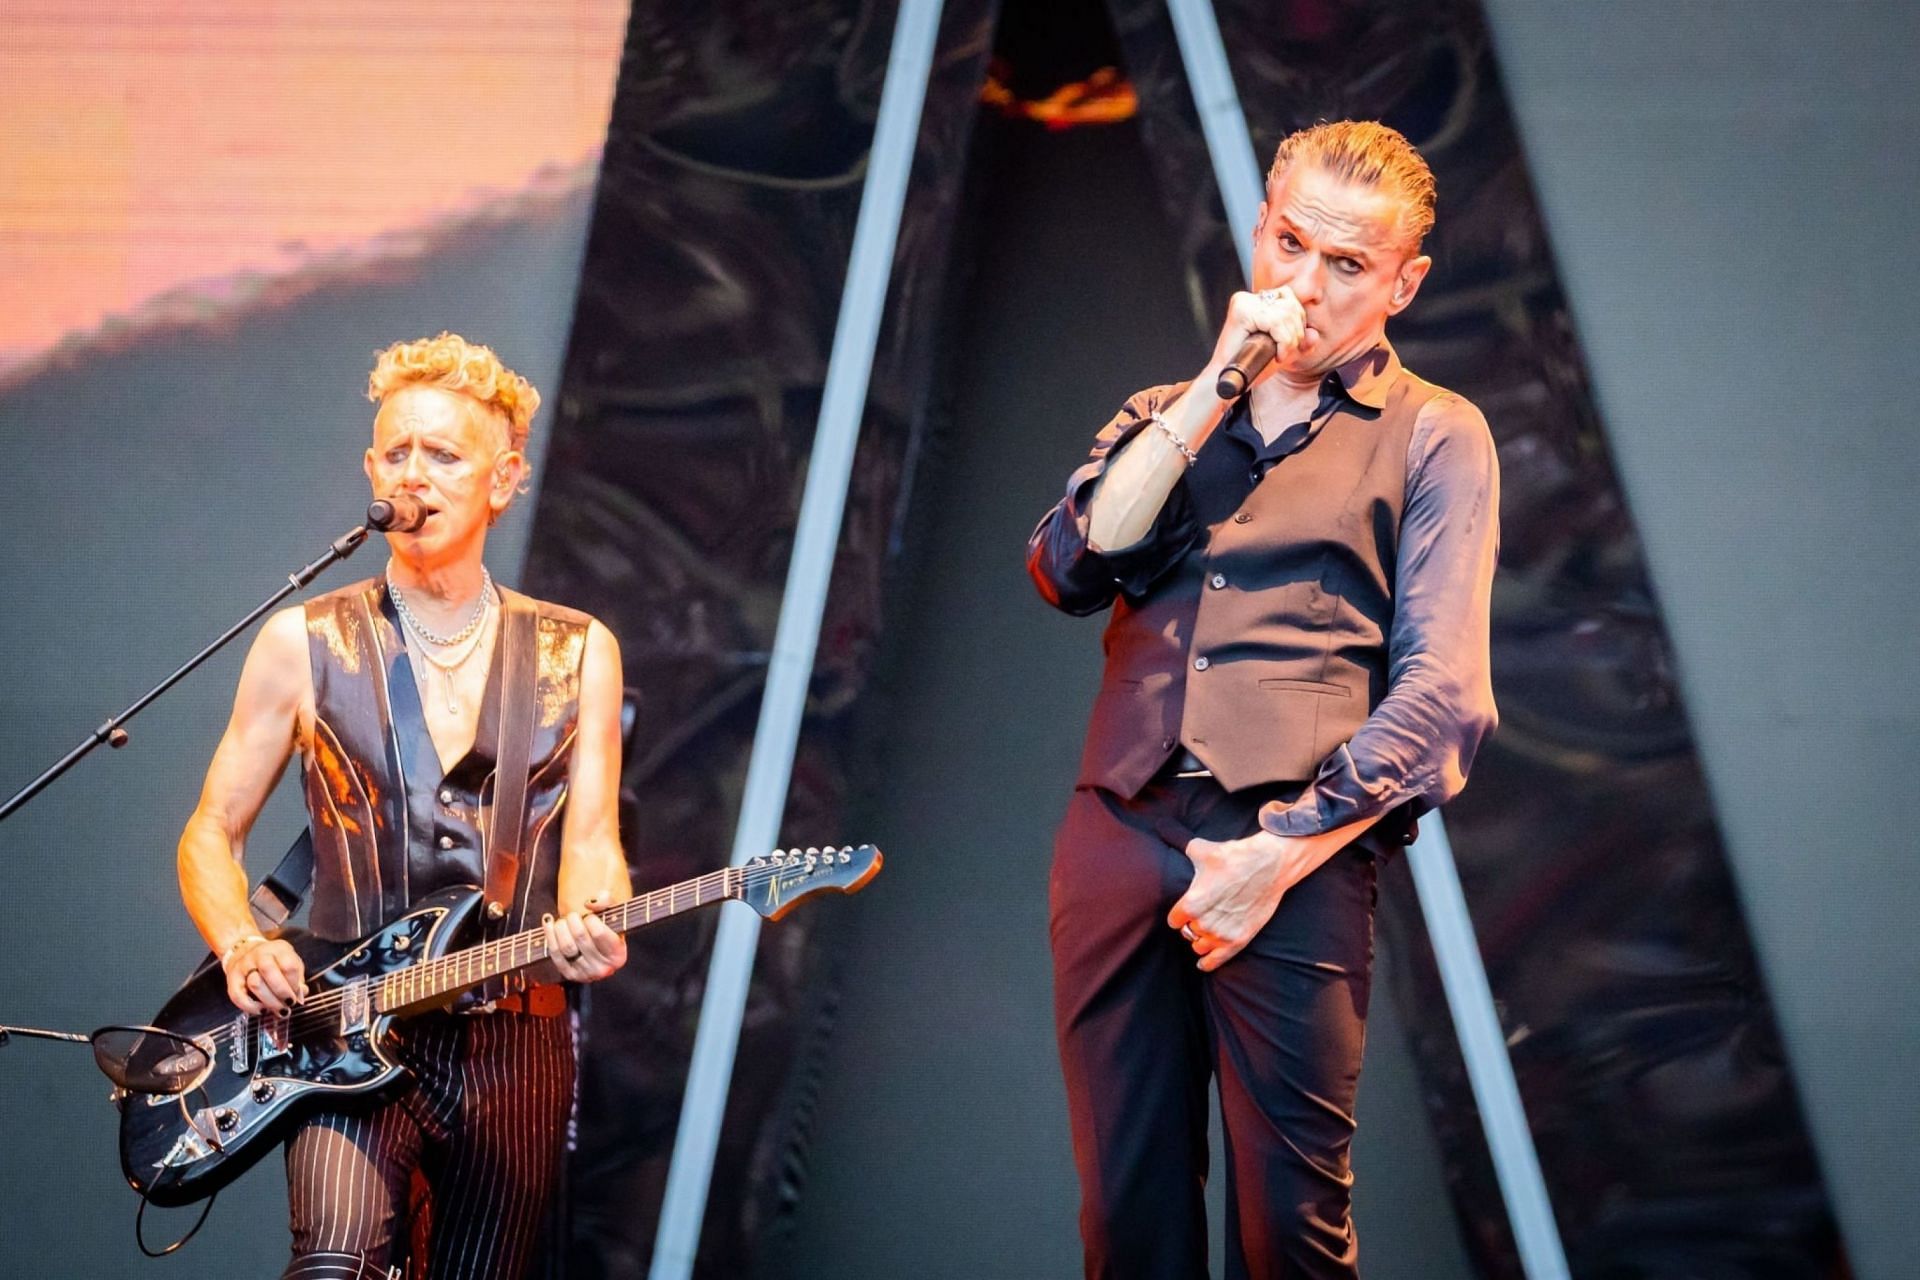 Depeche Mode  at the Olympiastadion Berlin in Berlin, Germany on July 7, 2023 (Image via Getty Images)